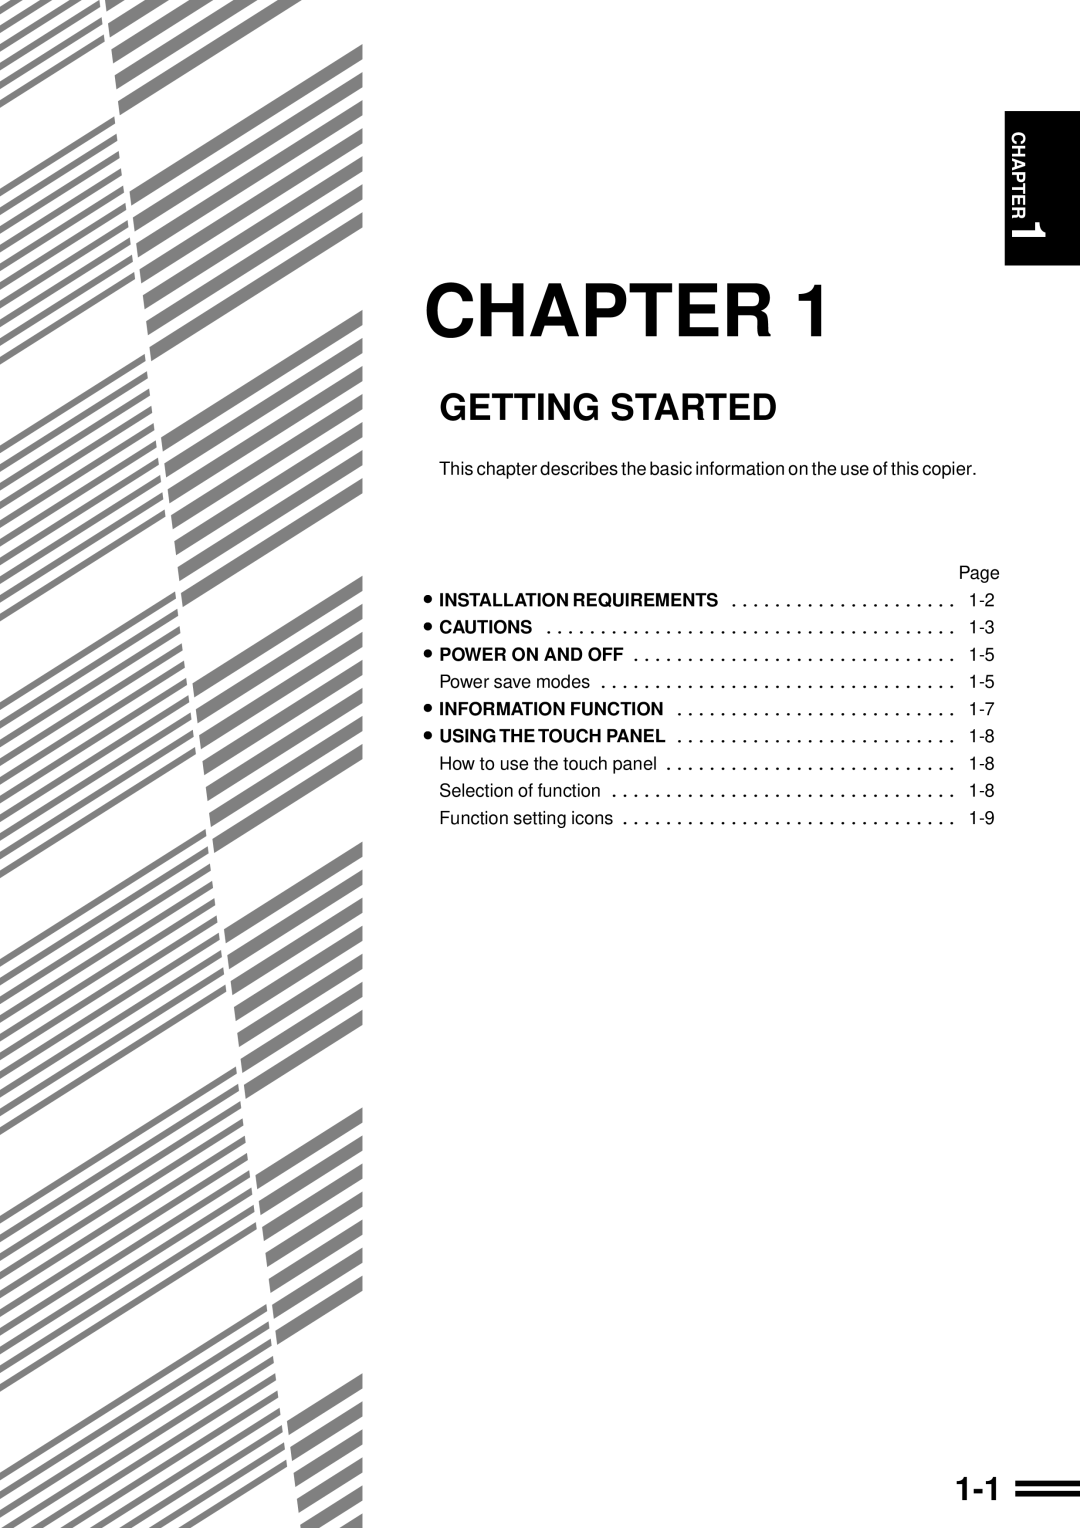 Sharp AR-287 manual Chapter, Getting Started, Installation Requirements 